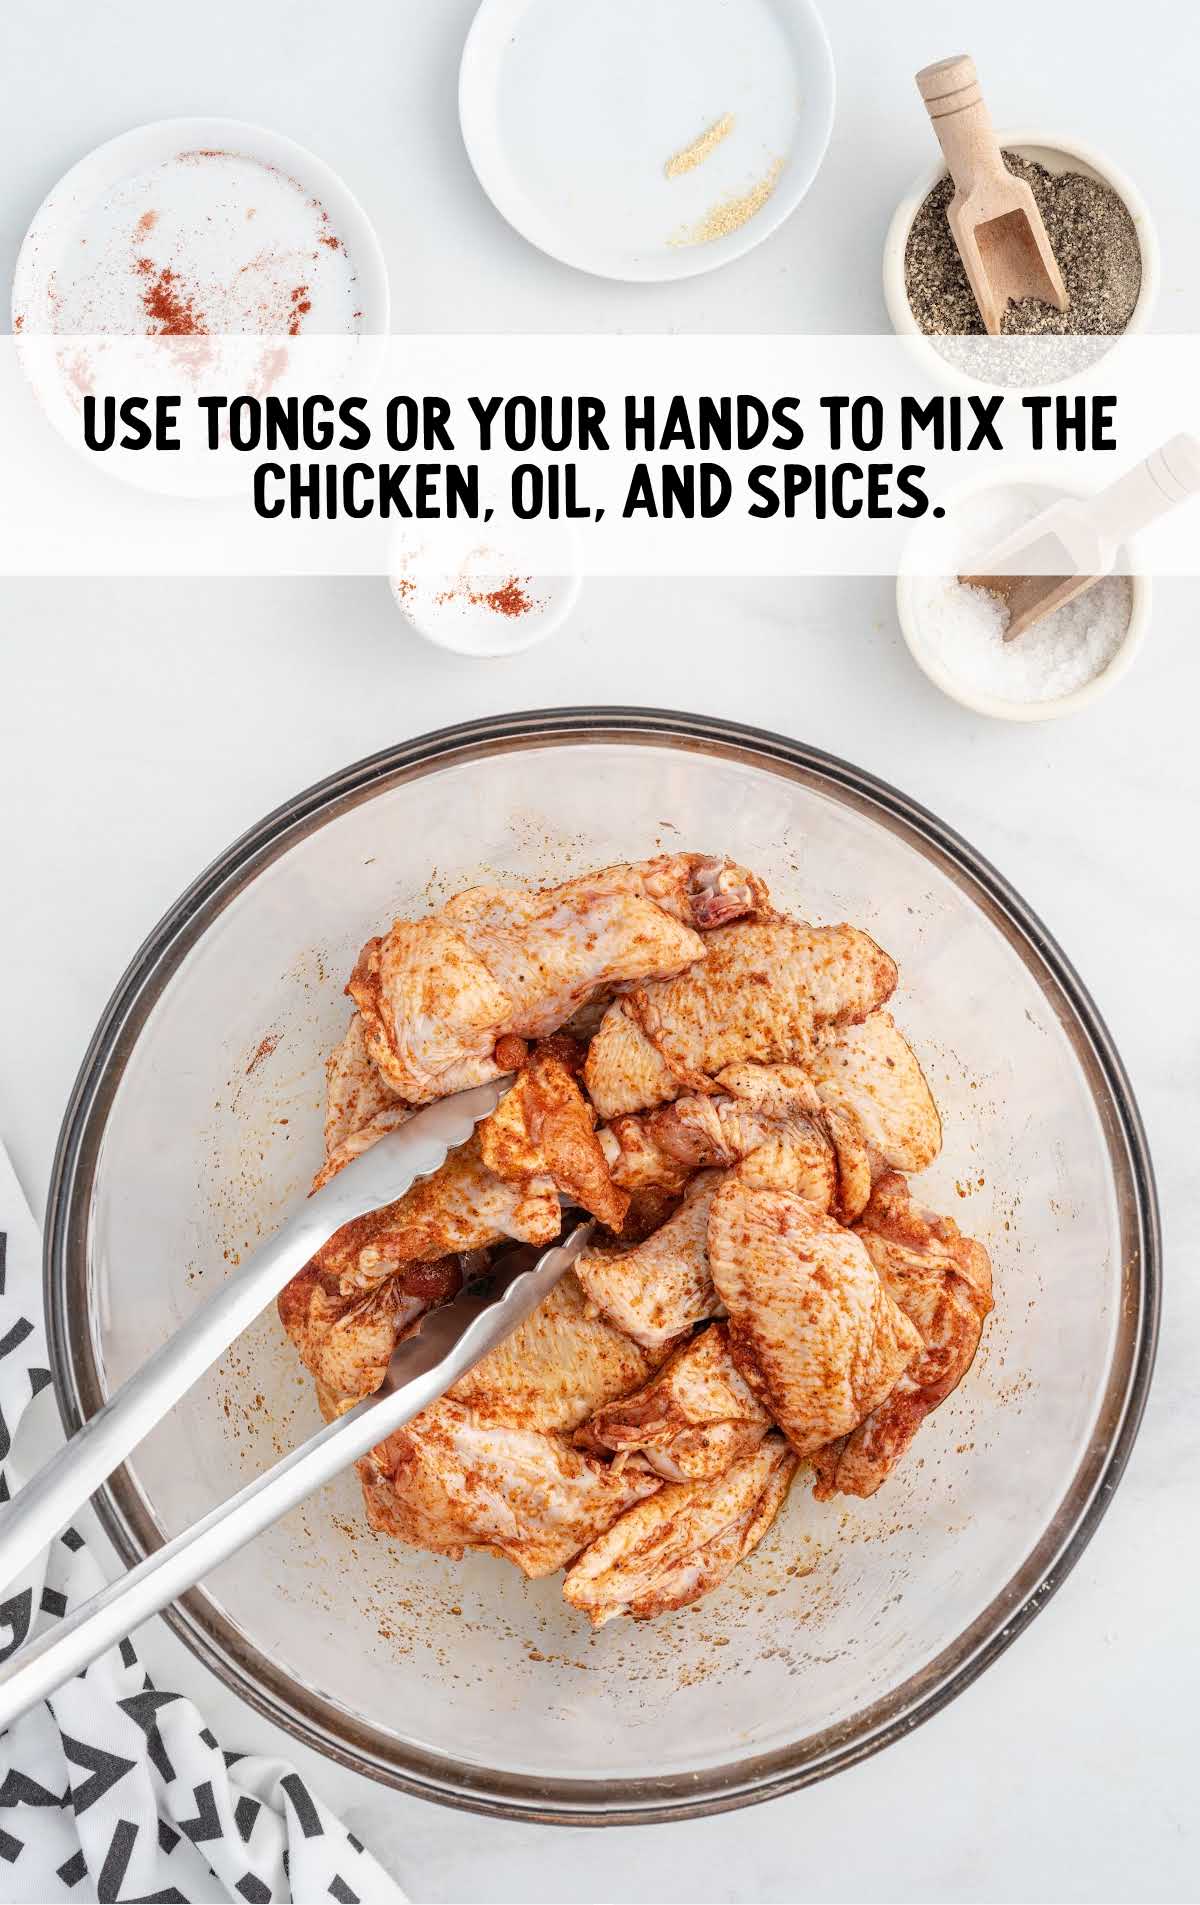 chicken, oil, and spices mixed in a bowl using hands or tongs